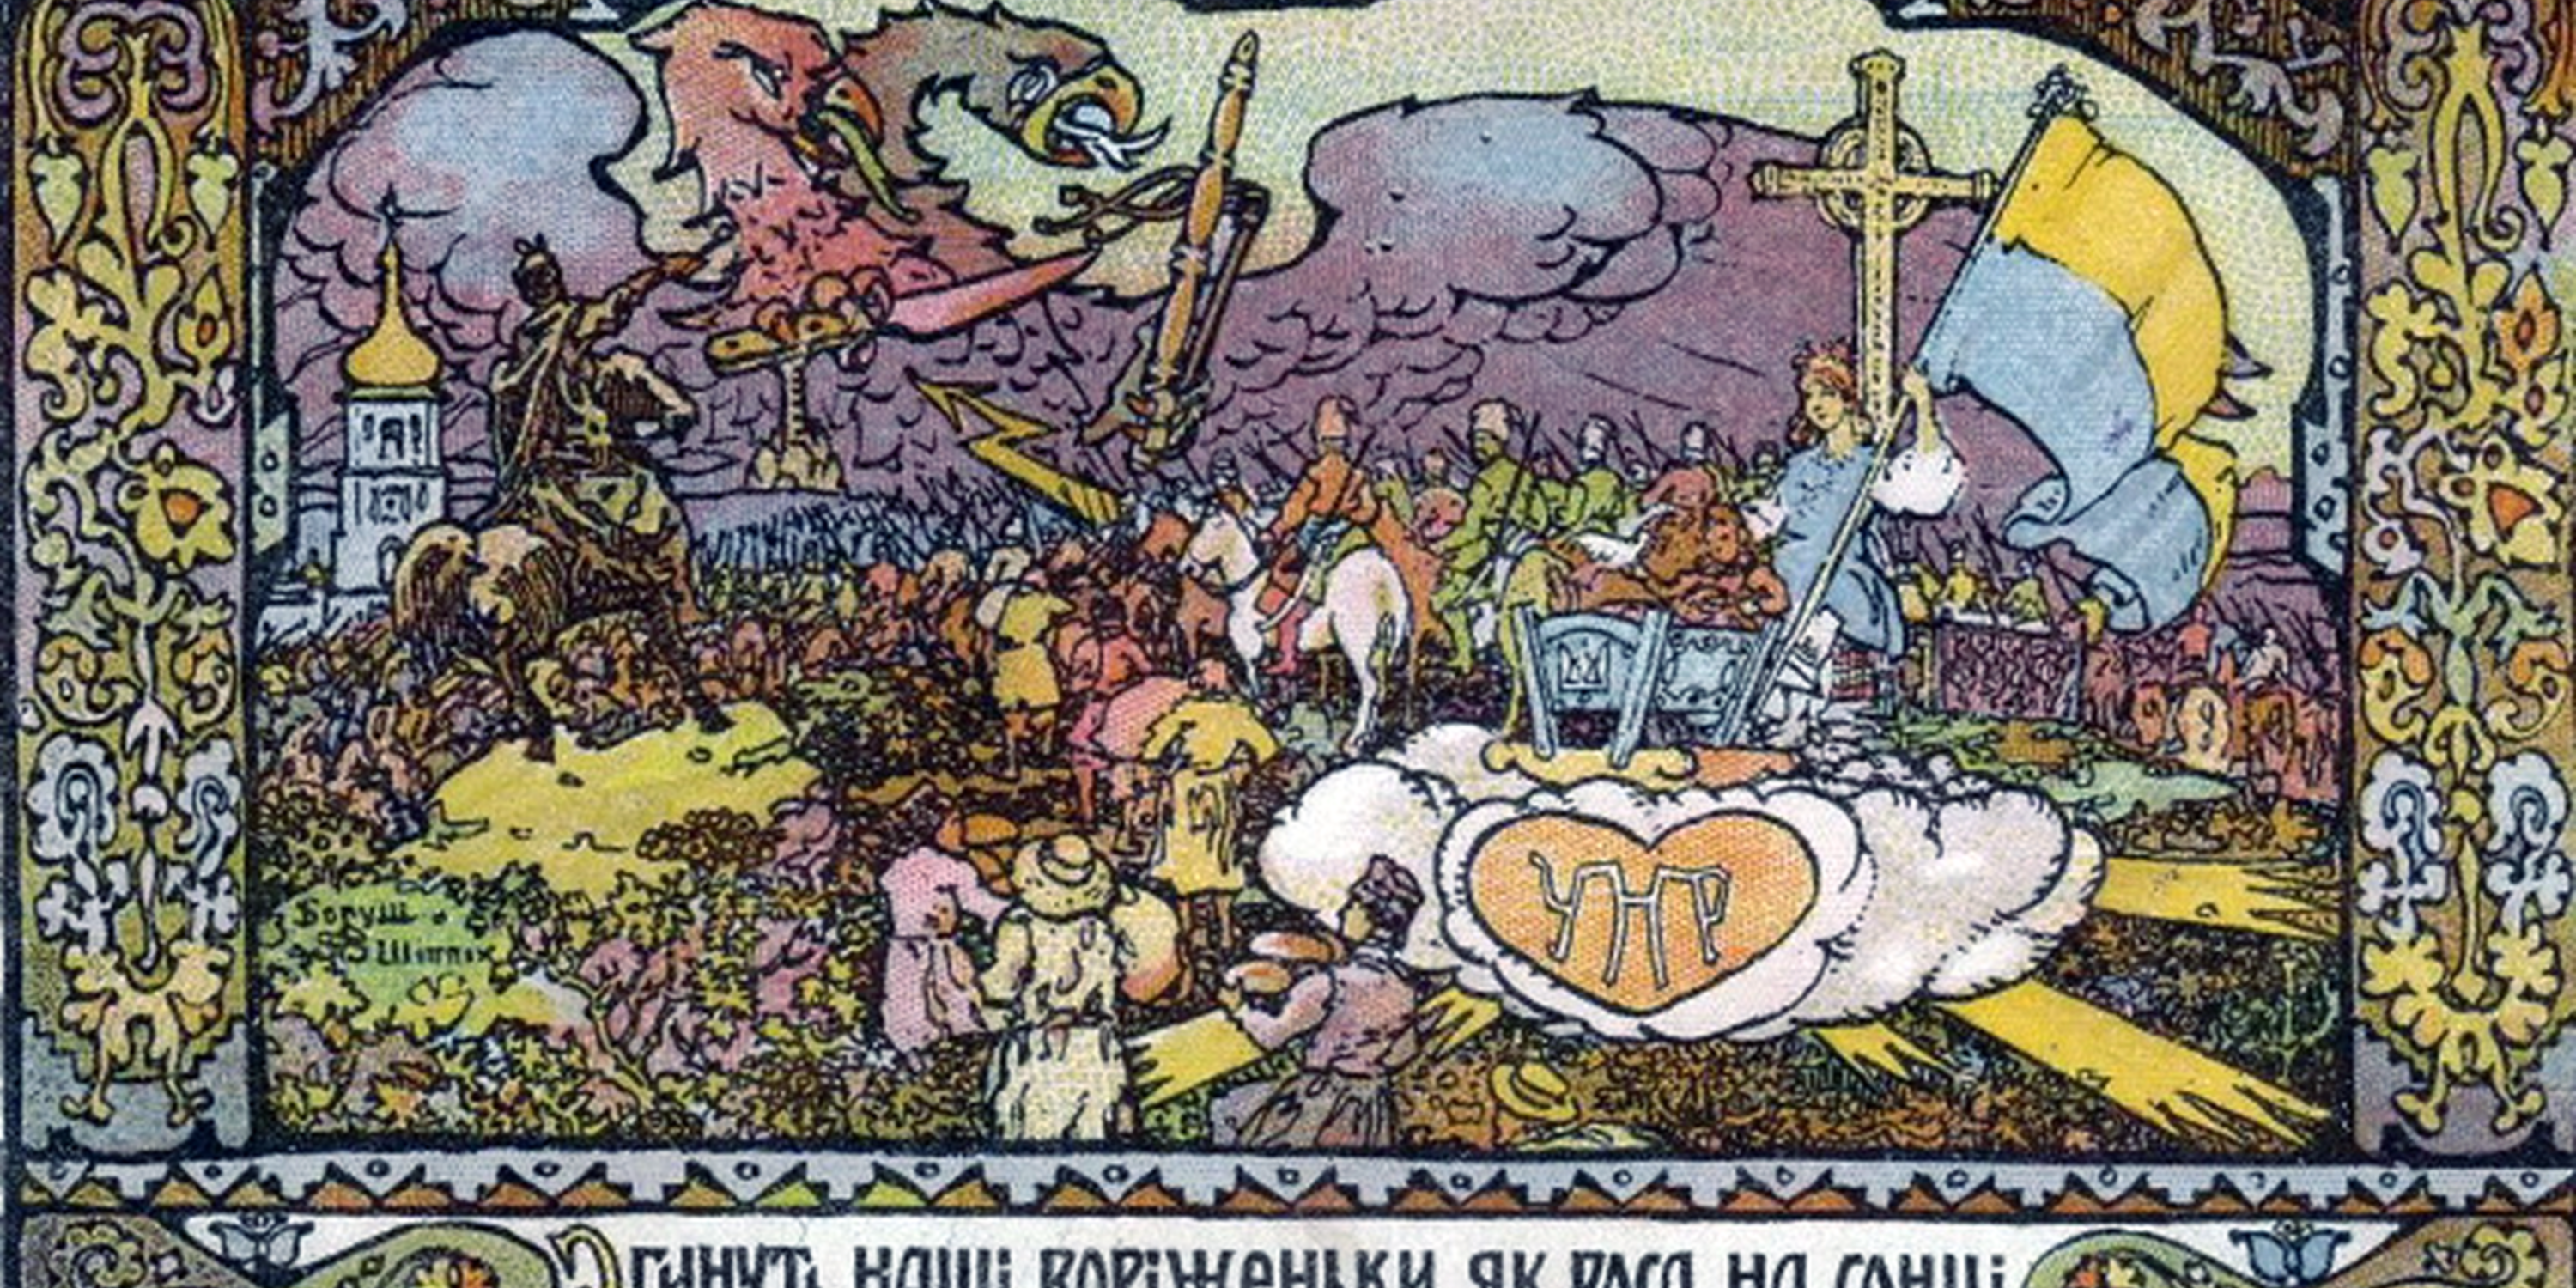 UNR postcard (ca. 1918), Ukrainians face invading Russia. Caption: “Our enemies die like the dew in the sun and we brothers will rule in our turn.” From the author’s collection.